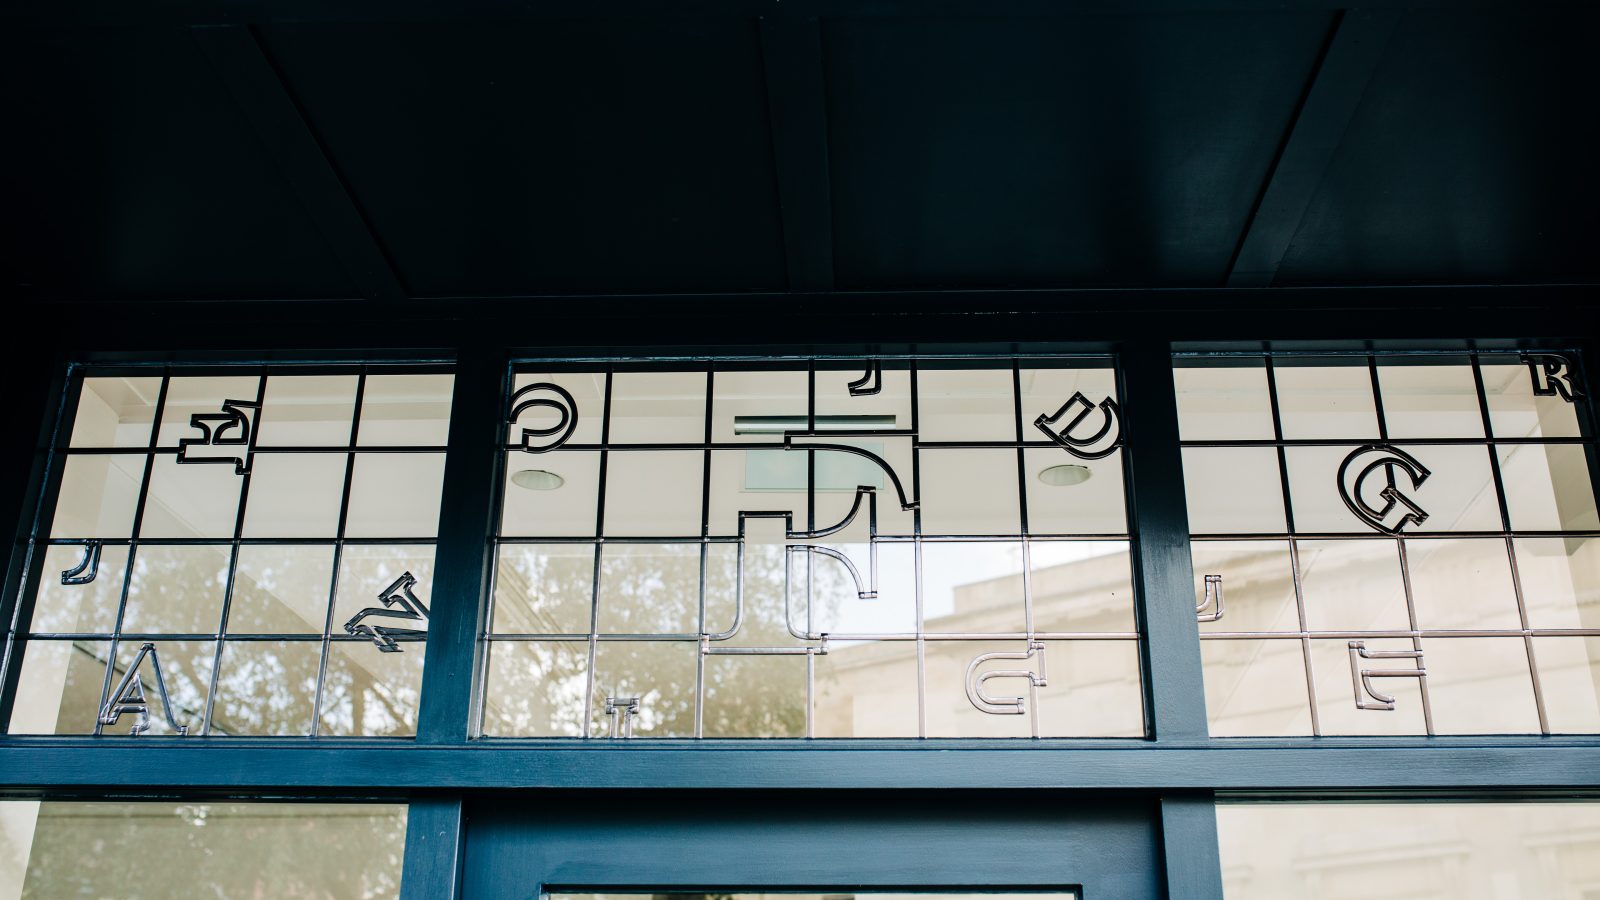 A row of square glass window panes set in a blue frame, each featuring a different black and white geometric shape that incorporates various letters, designed by a brand design agency. The view through the windows